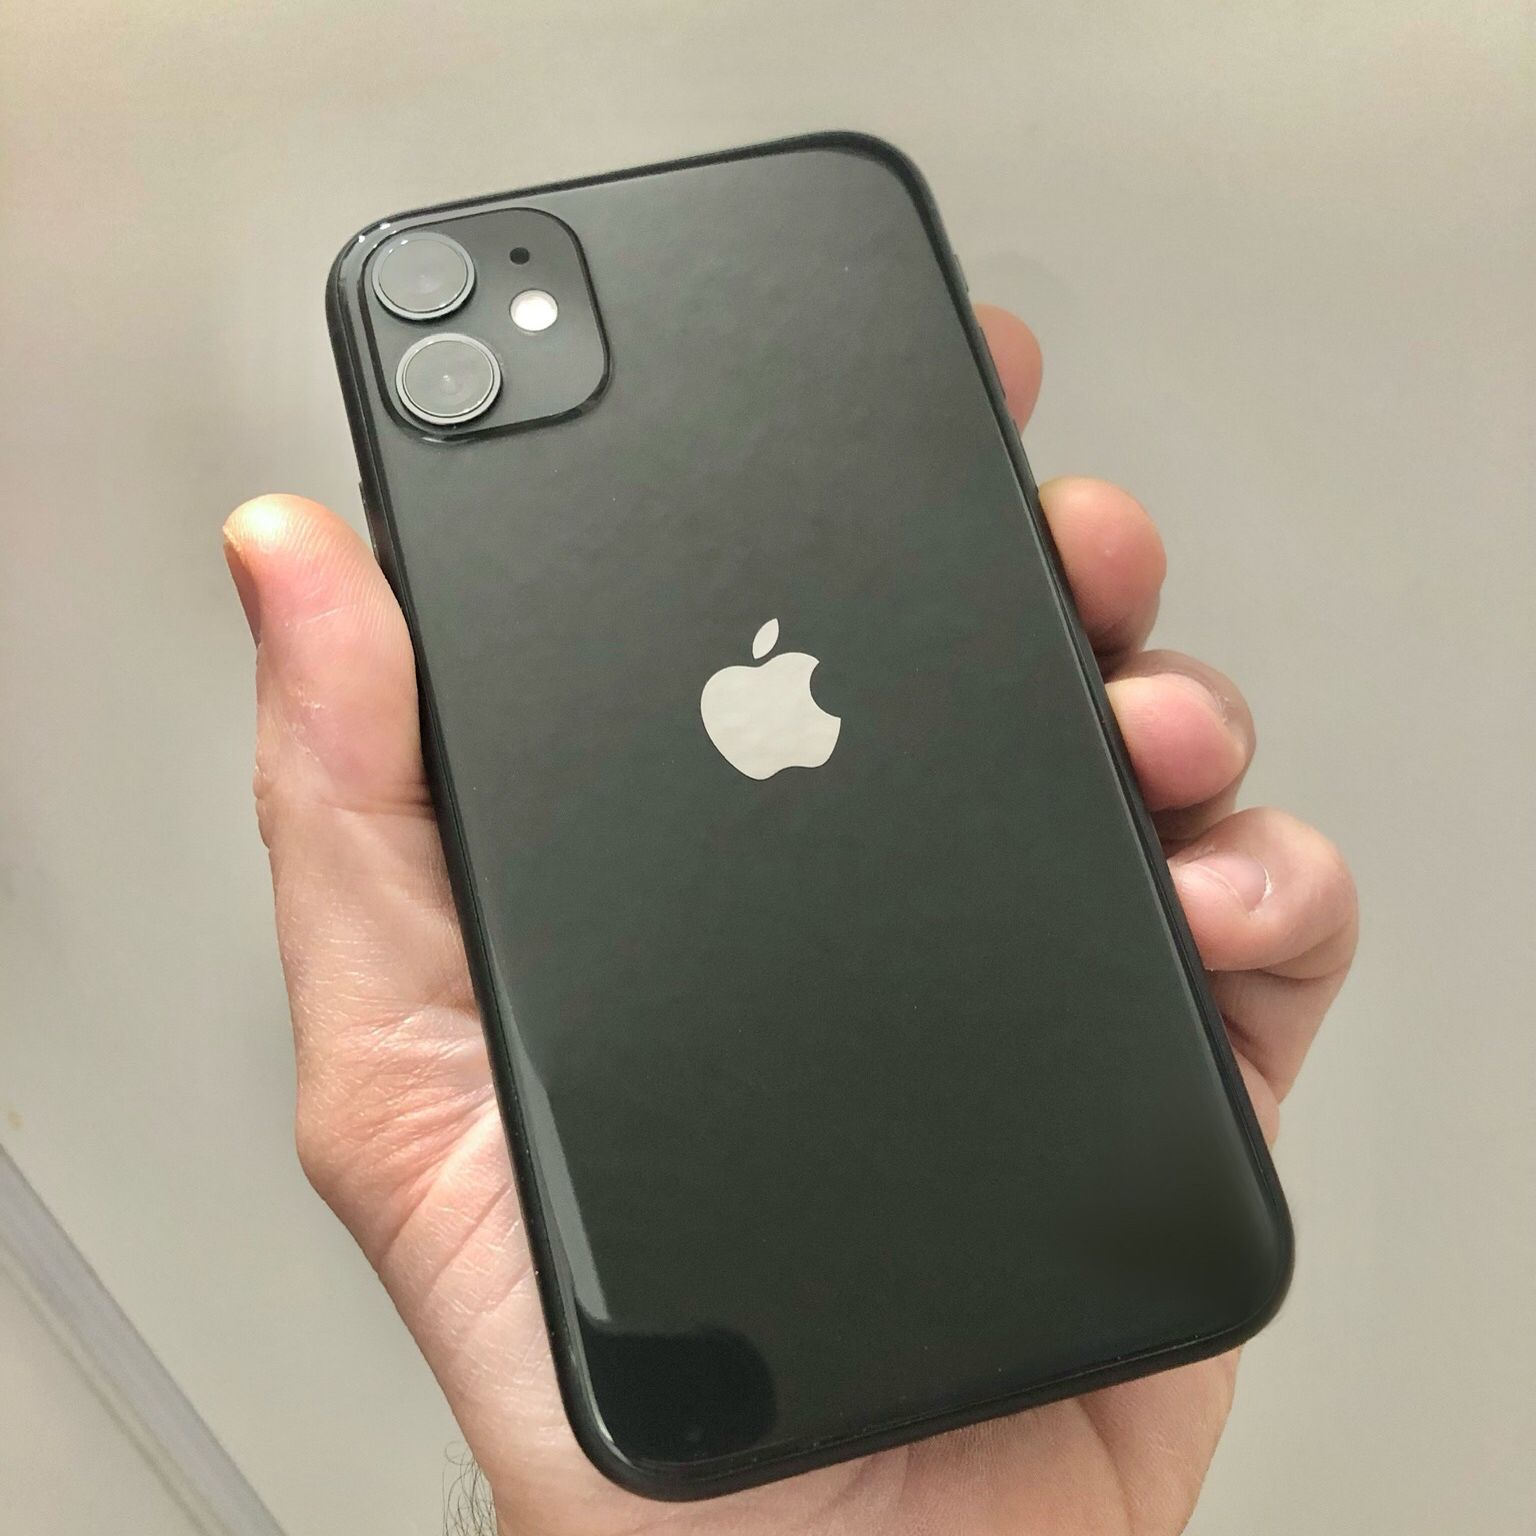 FIRM PRICE - iPhone 11 64gb Space Gray Factory Unlocked - VERY GOOD CONDITION  - Excellent Battery Health (4 Available)